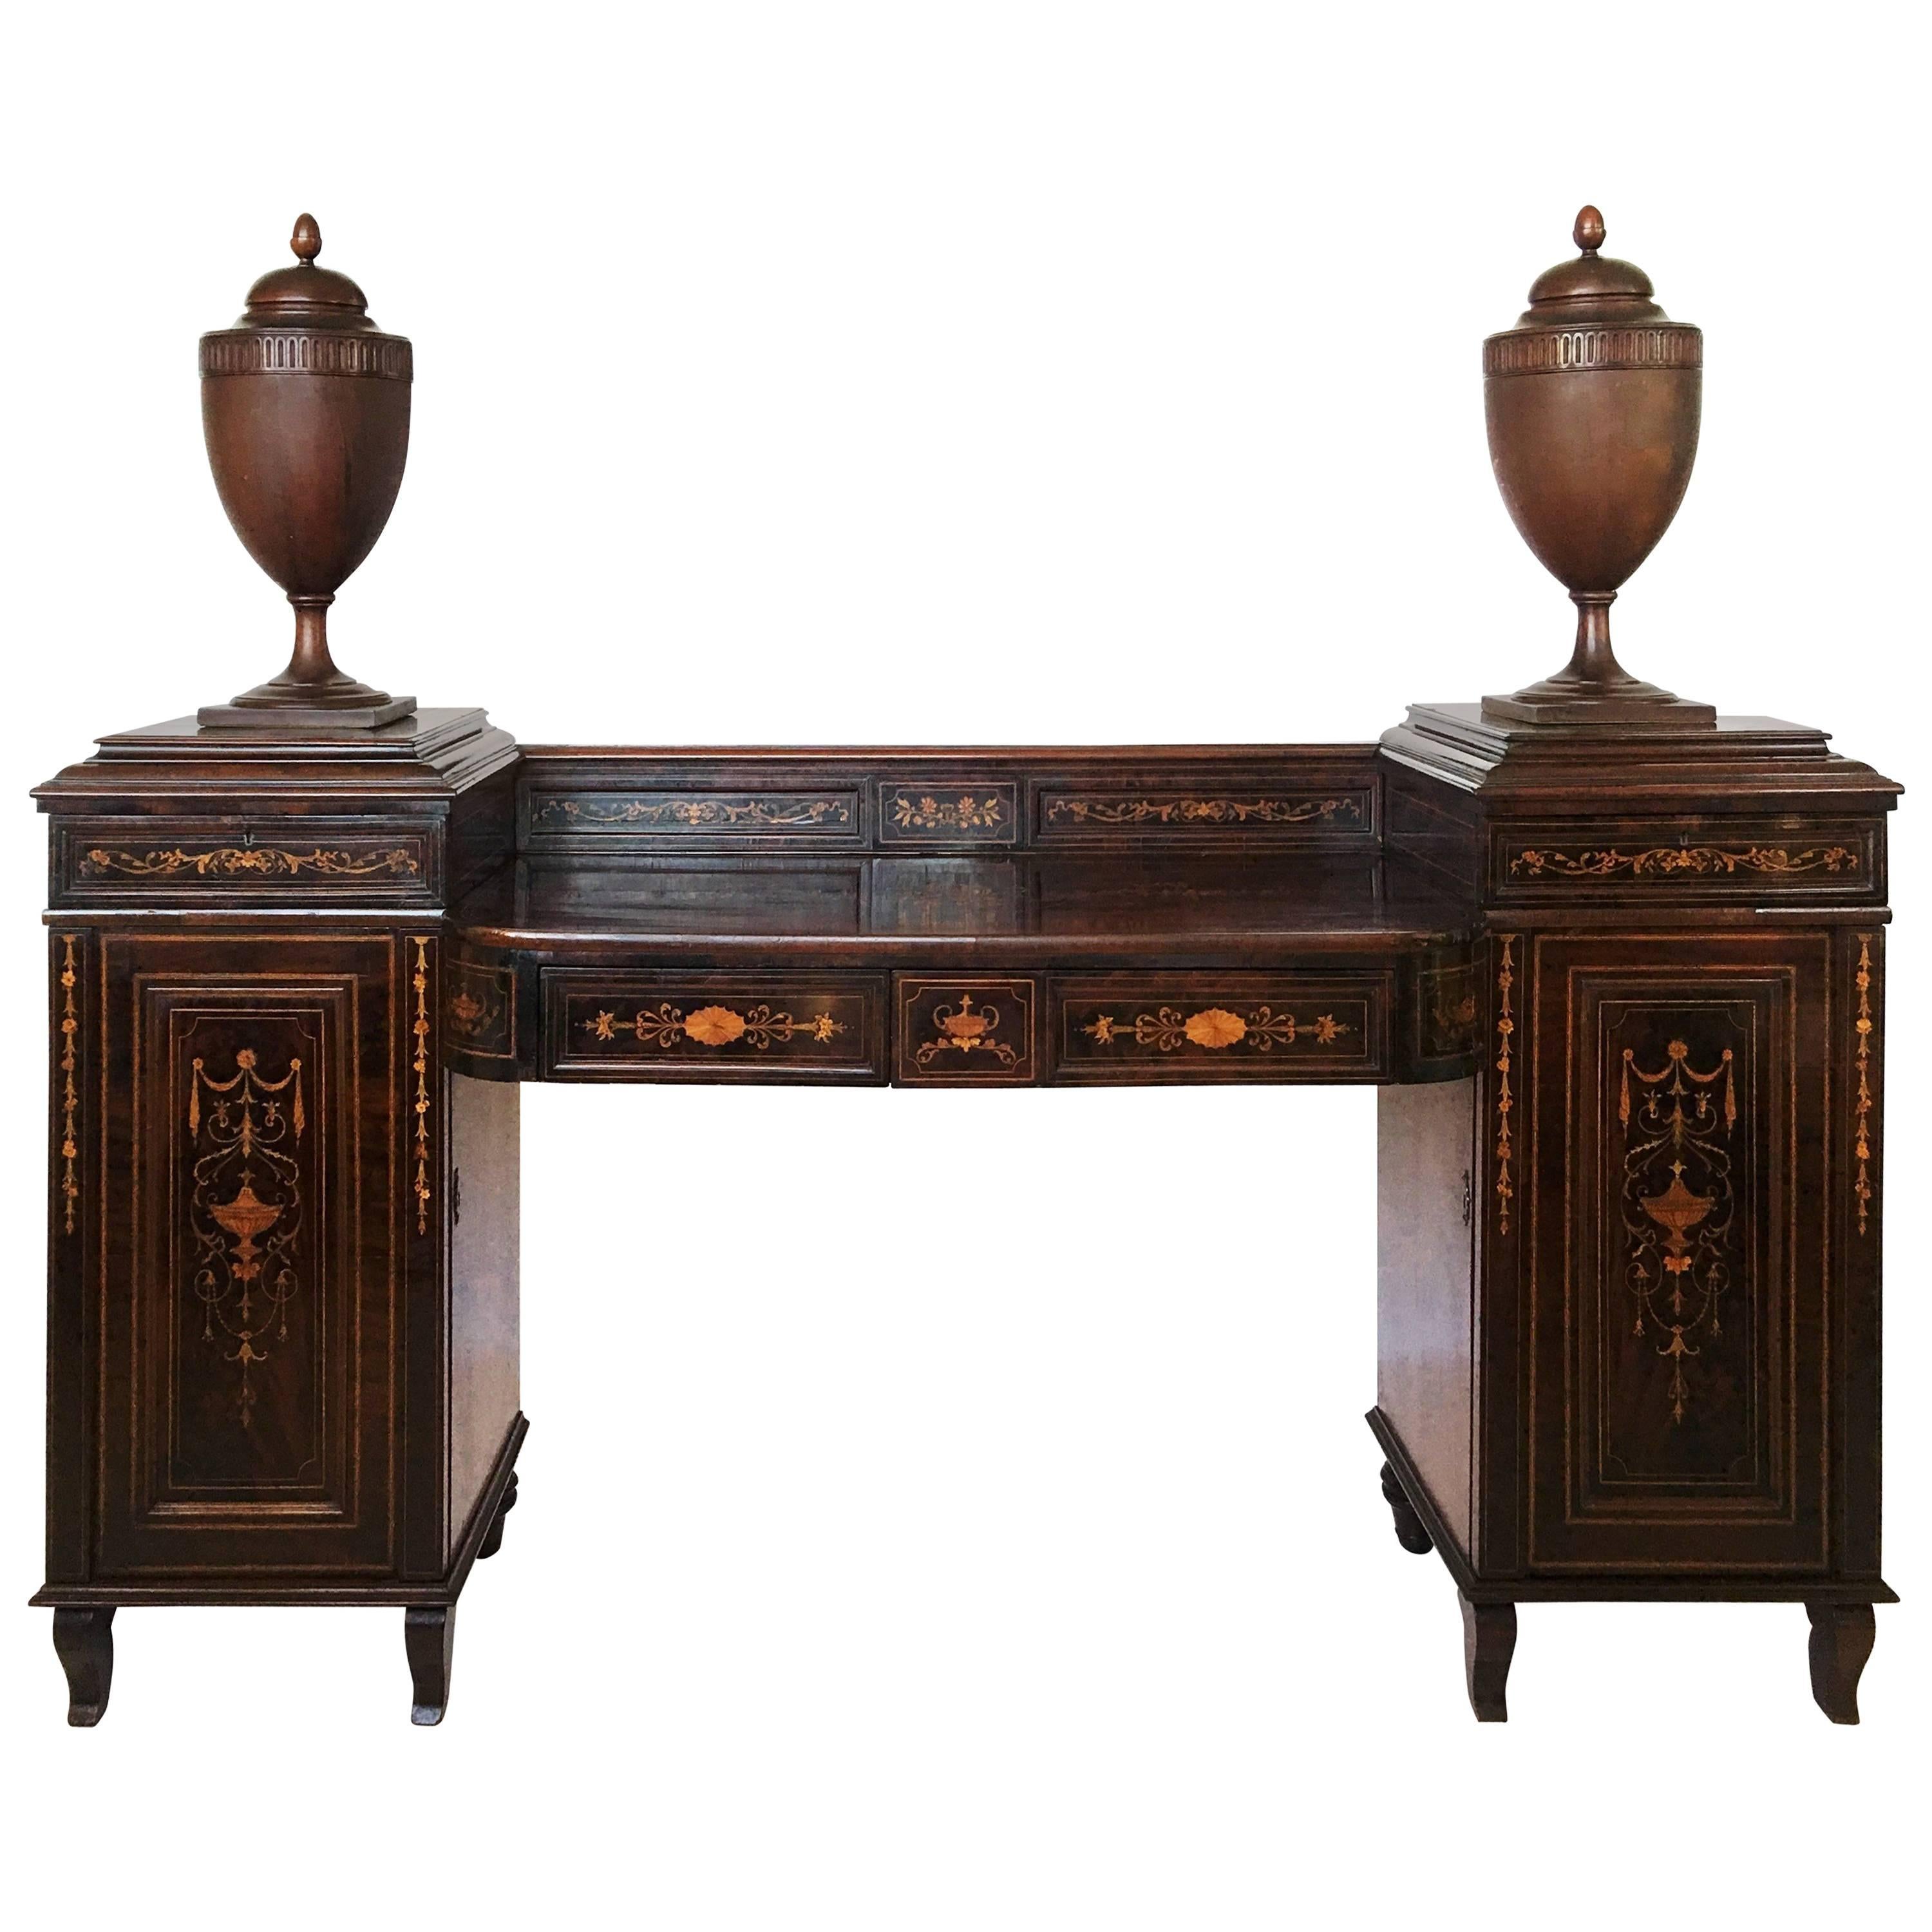 Early 19th Century Regency Marquetry Inlaid Rosewood Pedestal Sideboard with Urn For Sale